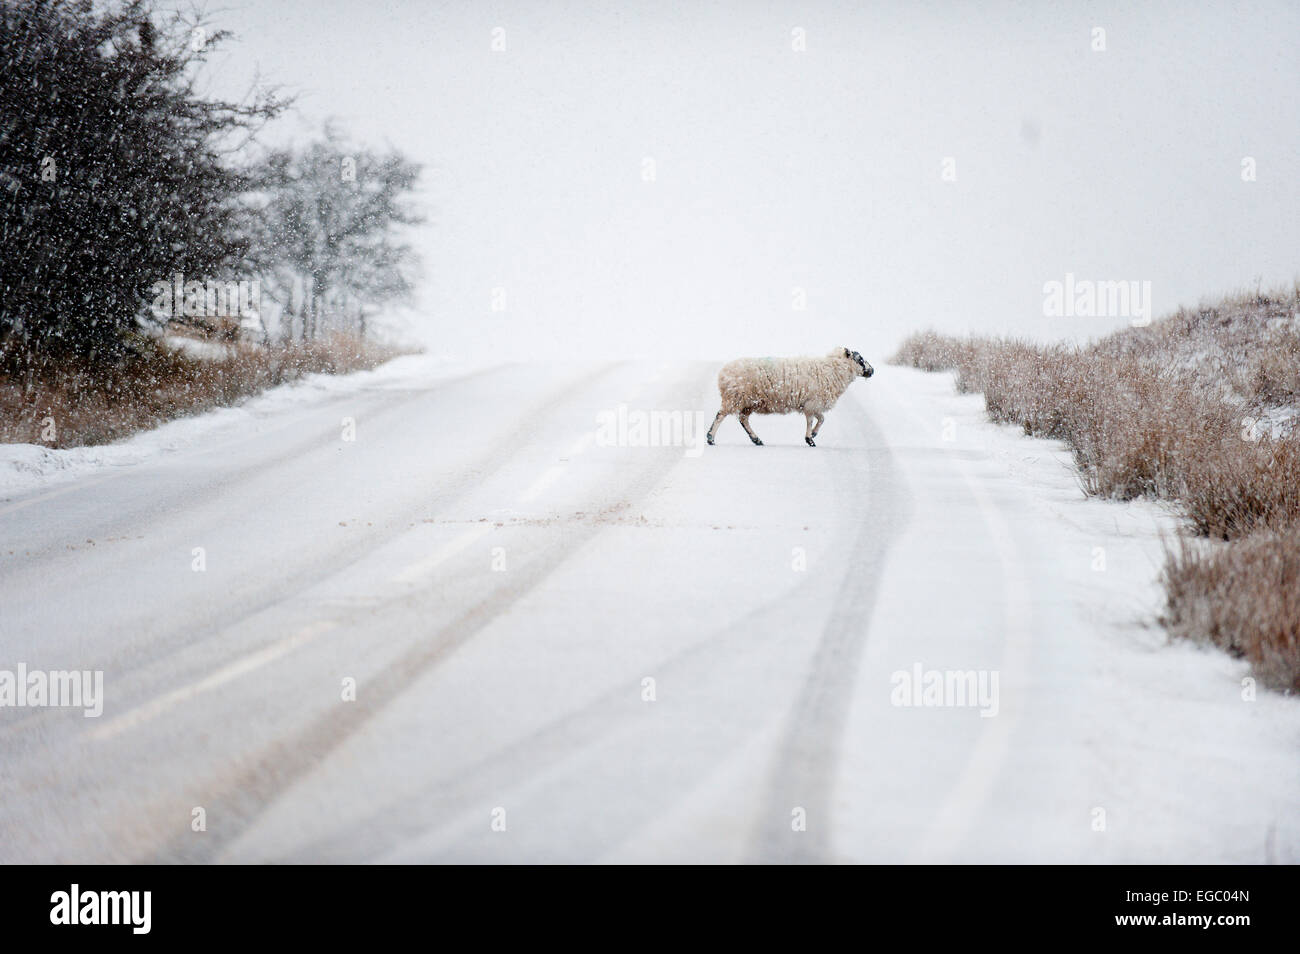 Mynydd Epynt, Powys, Wales, UK. 22nd february, 2015. UK Weather: A ewe crosses the B4520 ‘Brecon’ road between Builth Wells and Brecon on the high moorland of the Mynydd Epynt range of hills. Credit:  Graham M. Lawrence/Alamy Live News. Stock Photo